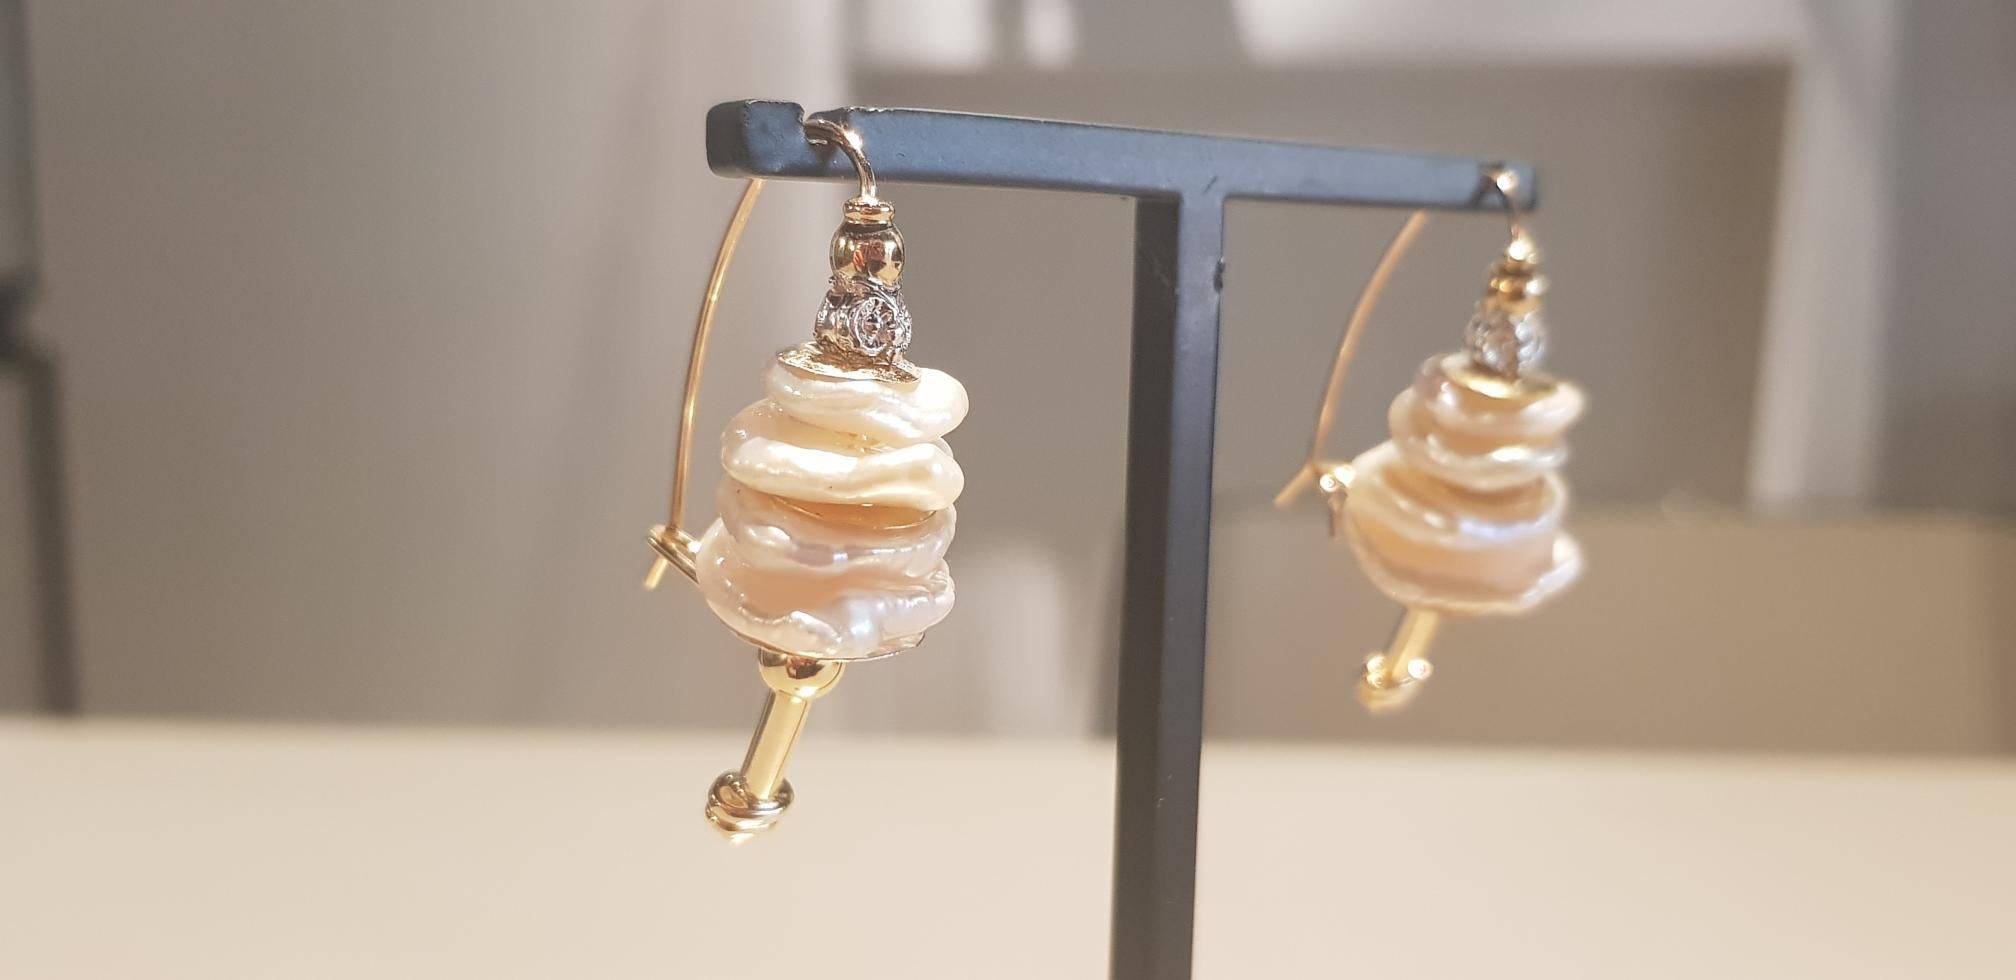 Misani has many pieces of art and one of them are these beautiful handmade earrings. They are made by our italian artisan in Milan and are curated from the beginning to the ending of production. What in them? Keshi pearls and 18k gold.
Keshi pearls